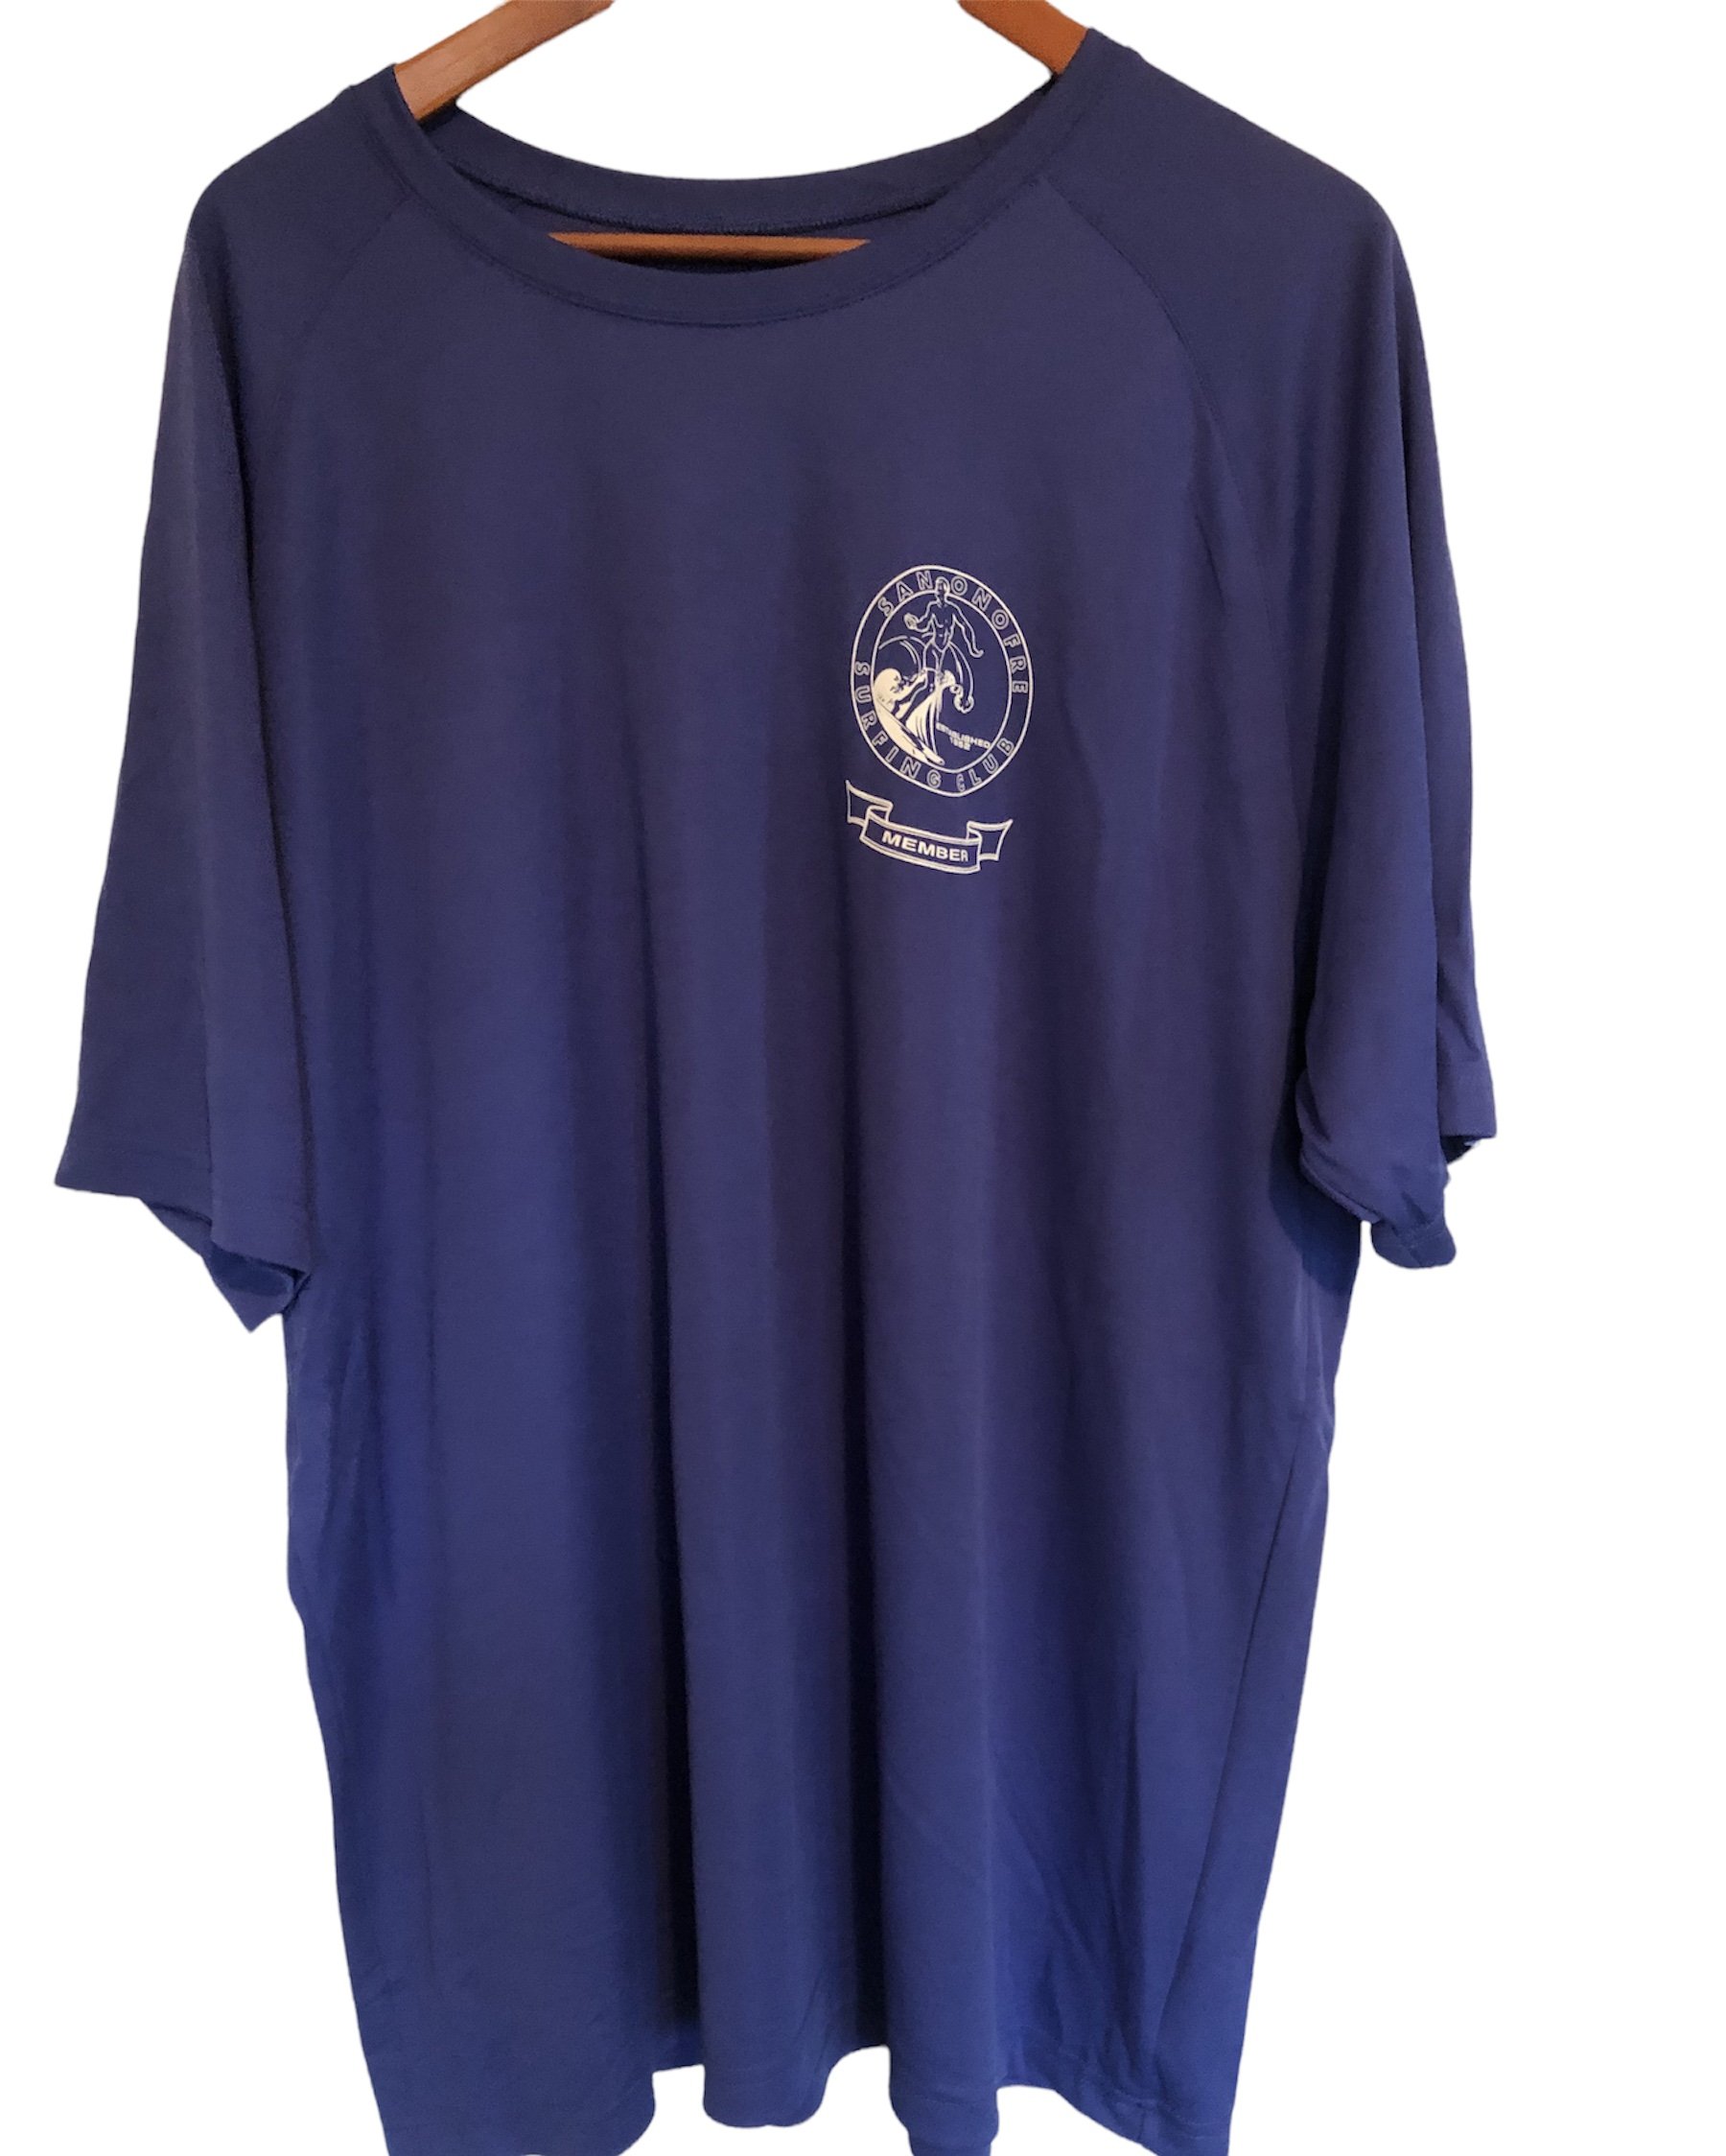 SALE Mens Tee Shirt - Various colors — San Onofre Surfing Club